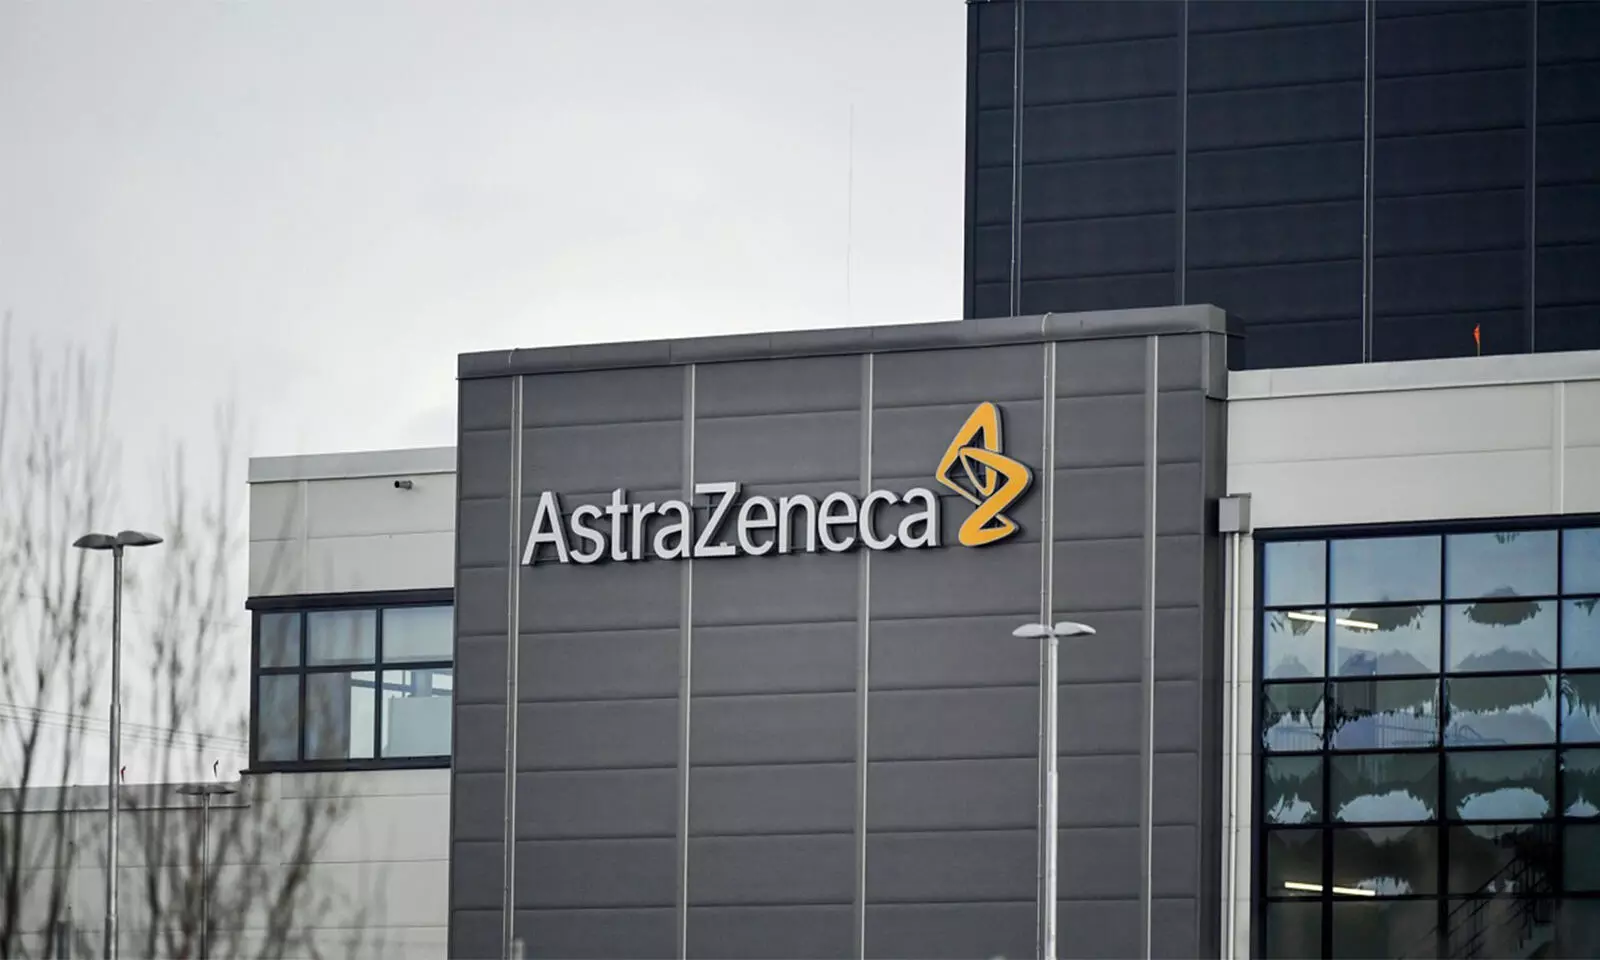 AstraZeneca, US strike deal for Covid-19 antibody treatment touted by Trump